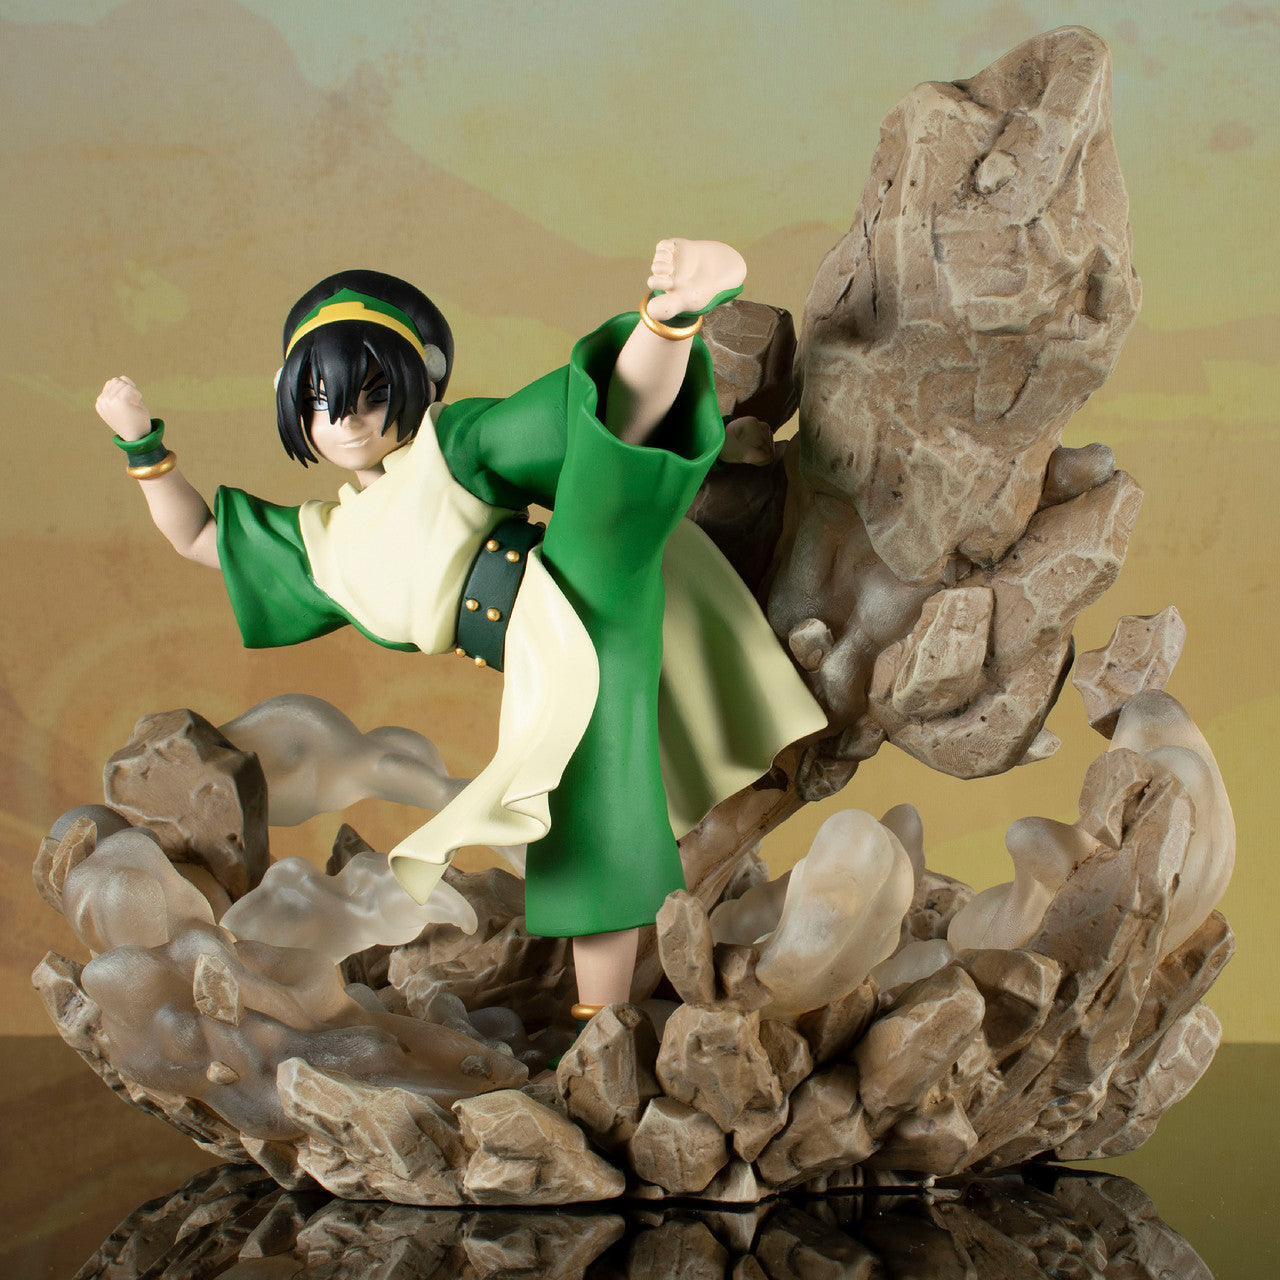 Toph Avatar: The Last Airbender Gallery Statue